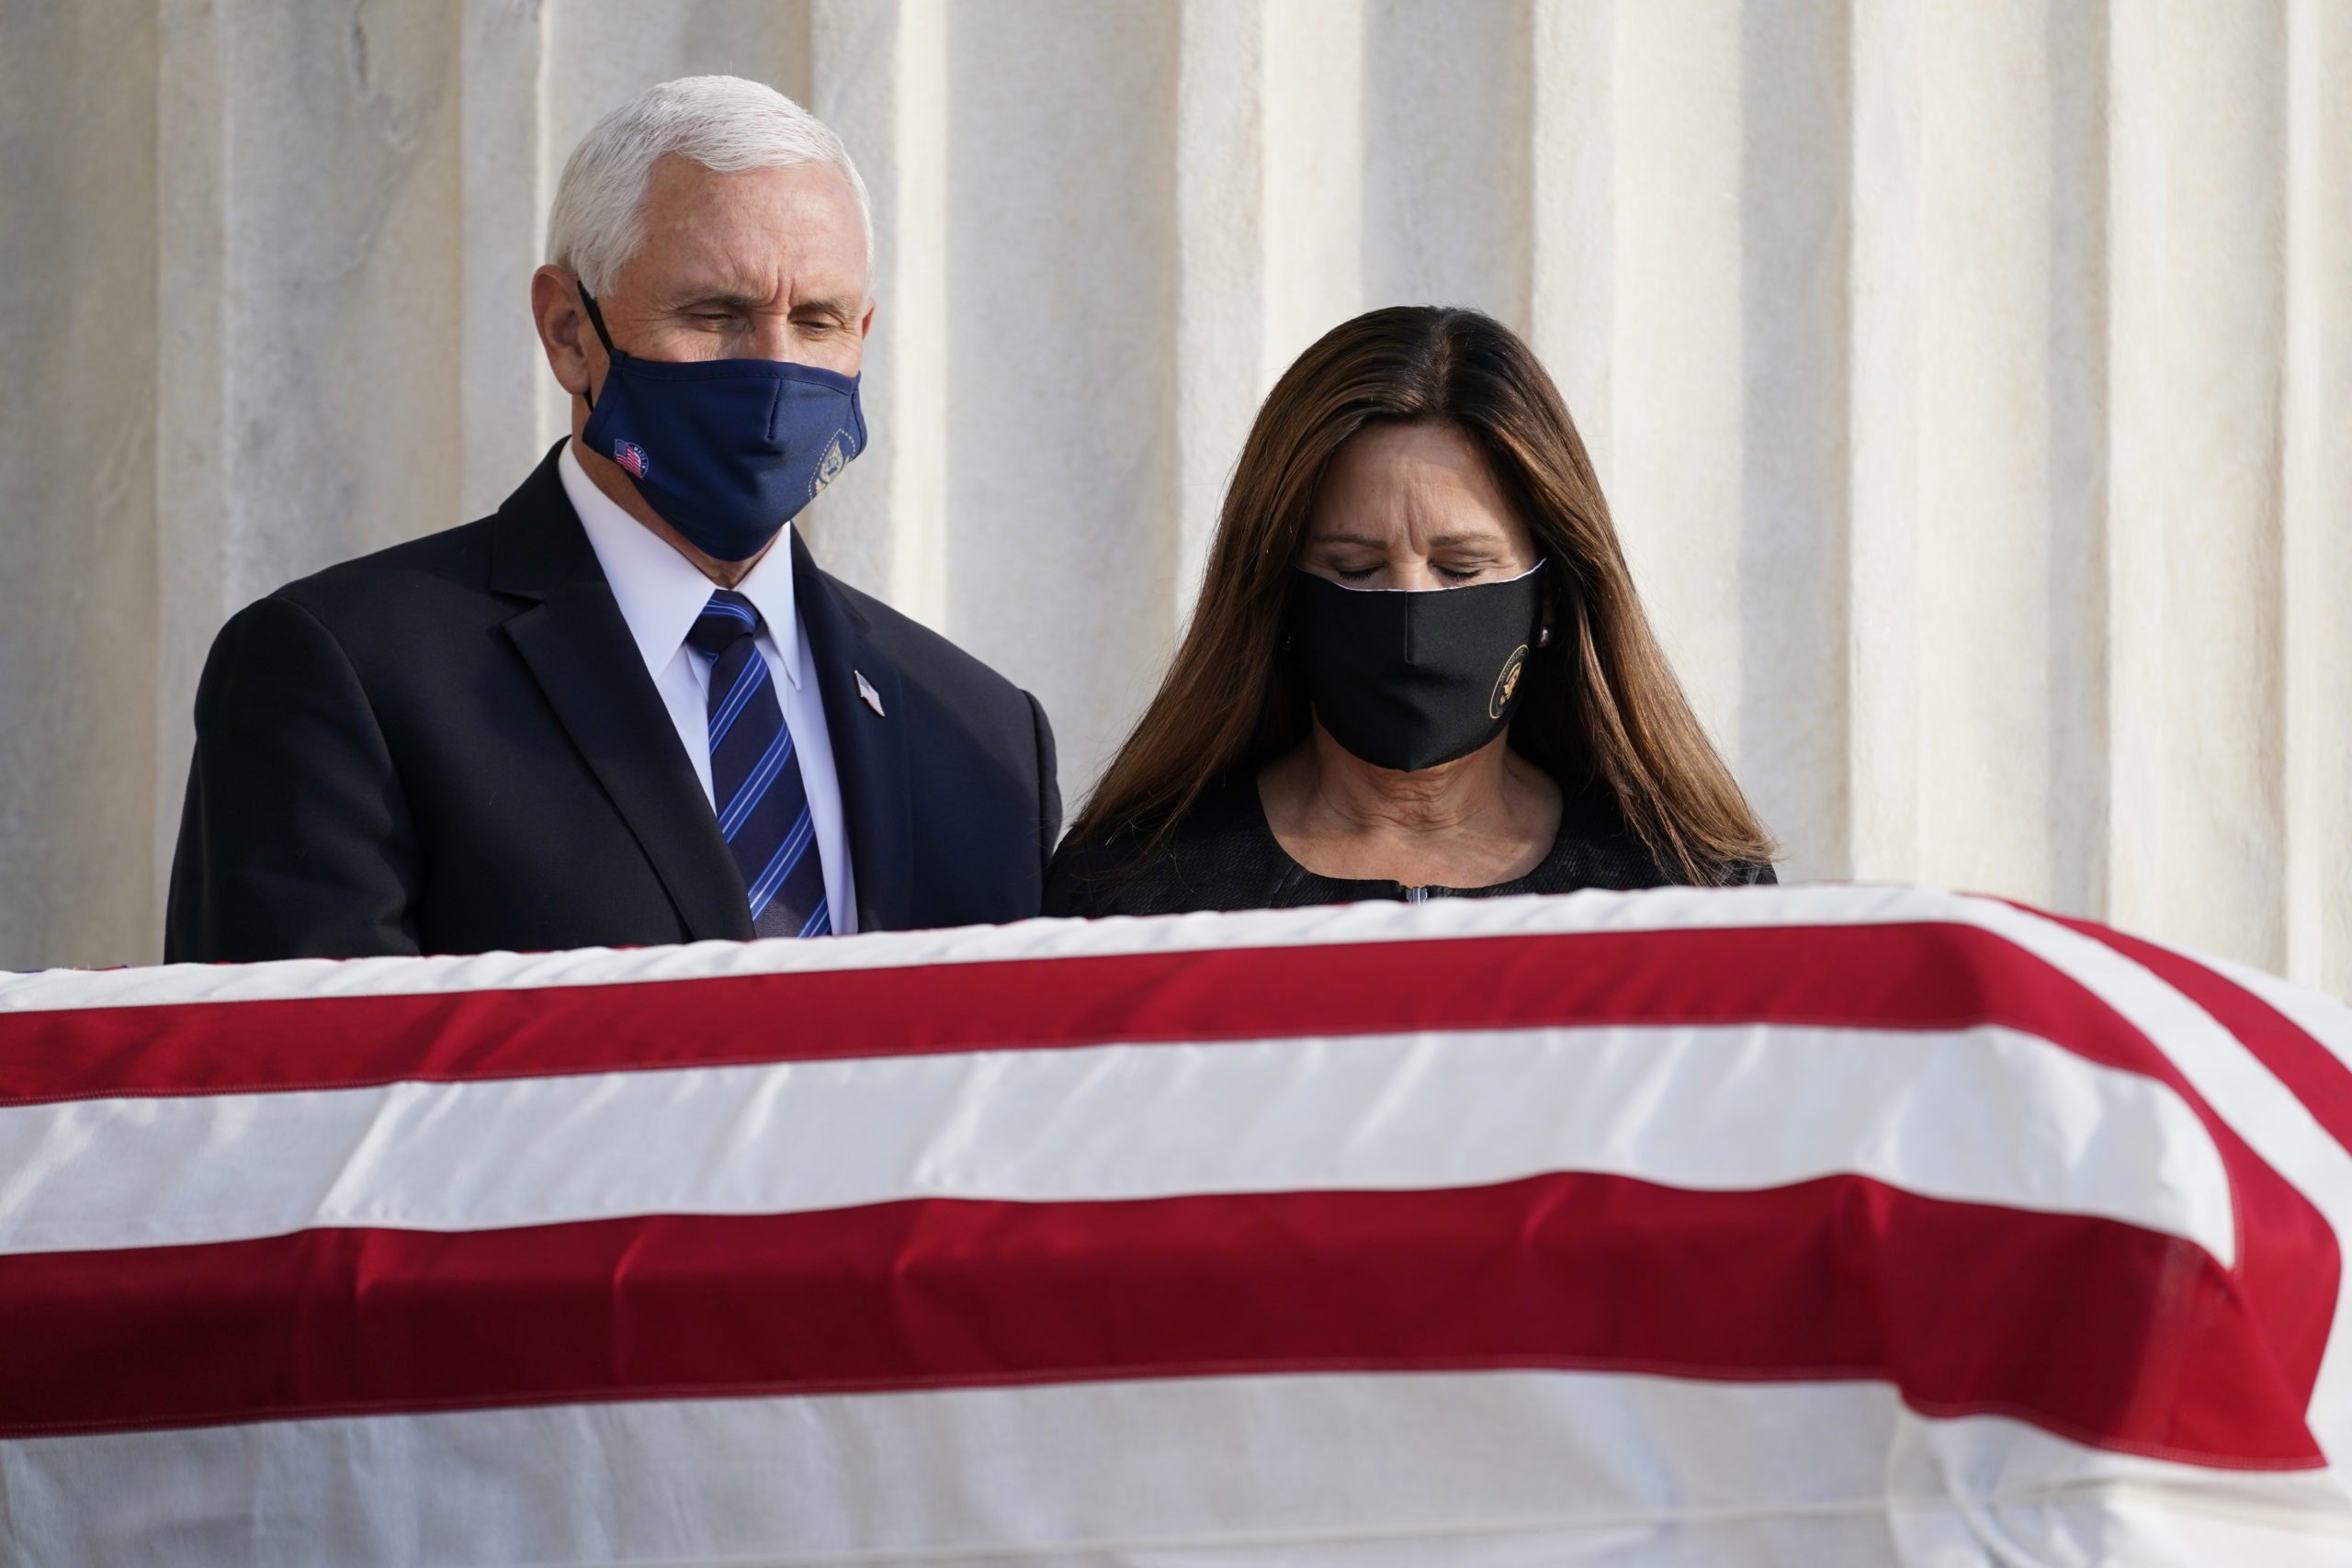 WASHINGTON, DC - SEPTEMBER 23: U.S. Vice President Mike Pence and his wife Karen Pence pay their respects at the casket bearing the remains of Justice Ruth Bader Ginsburg at the steps of the U.S. Supreme Court on September 23, 2020 in Washington, DC. Ginsburg, appointed to the high court by President Bill Clinton in 1993, died September 18 of complications due to pancreatic cancer. She was 87. (Photo by Alex Brandon-Pool/Getty Images)